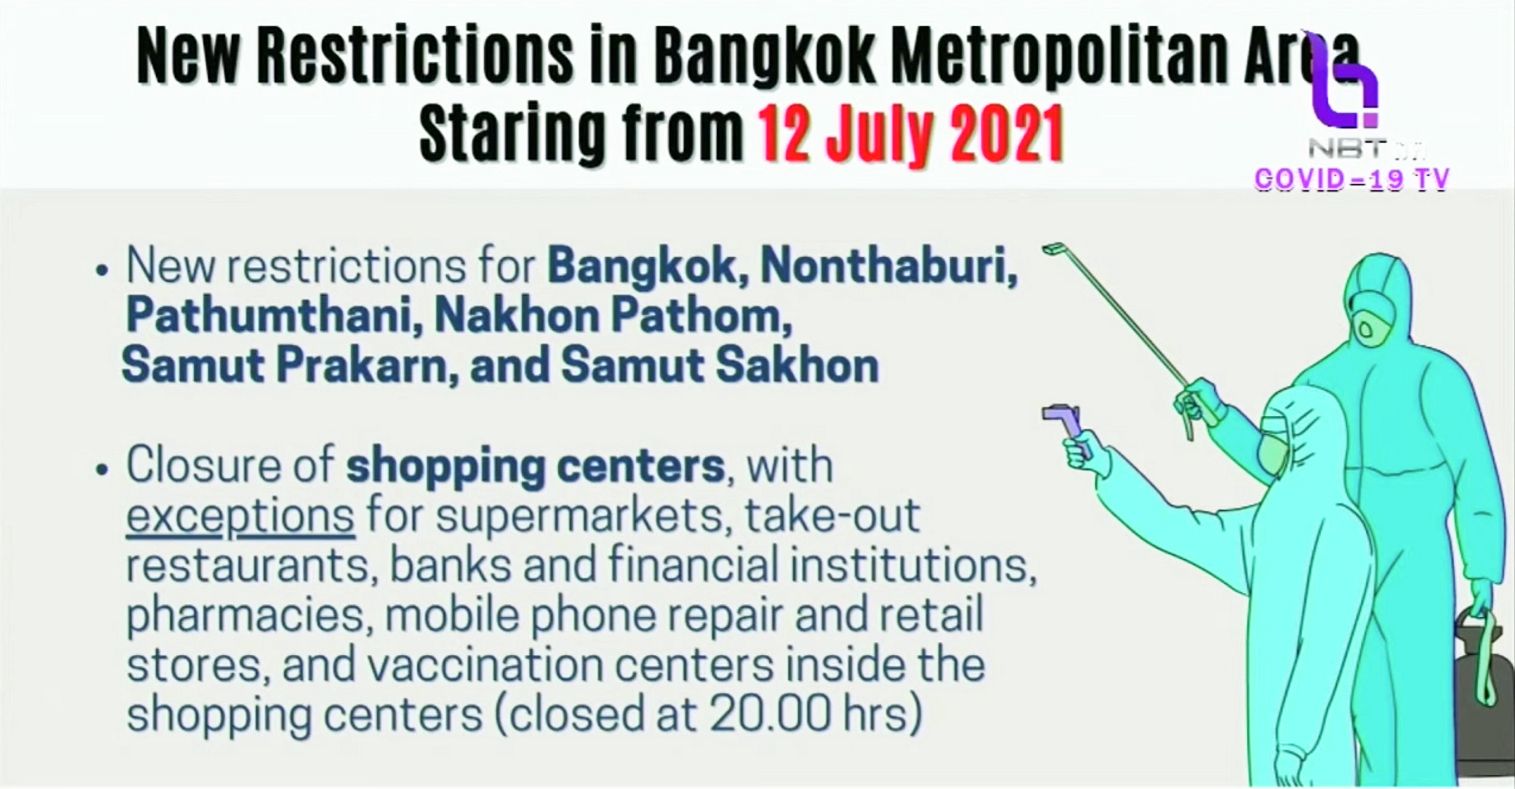 New restrictions